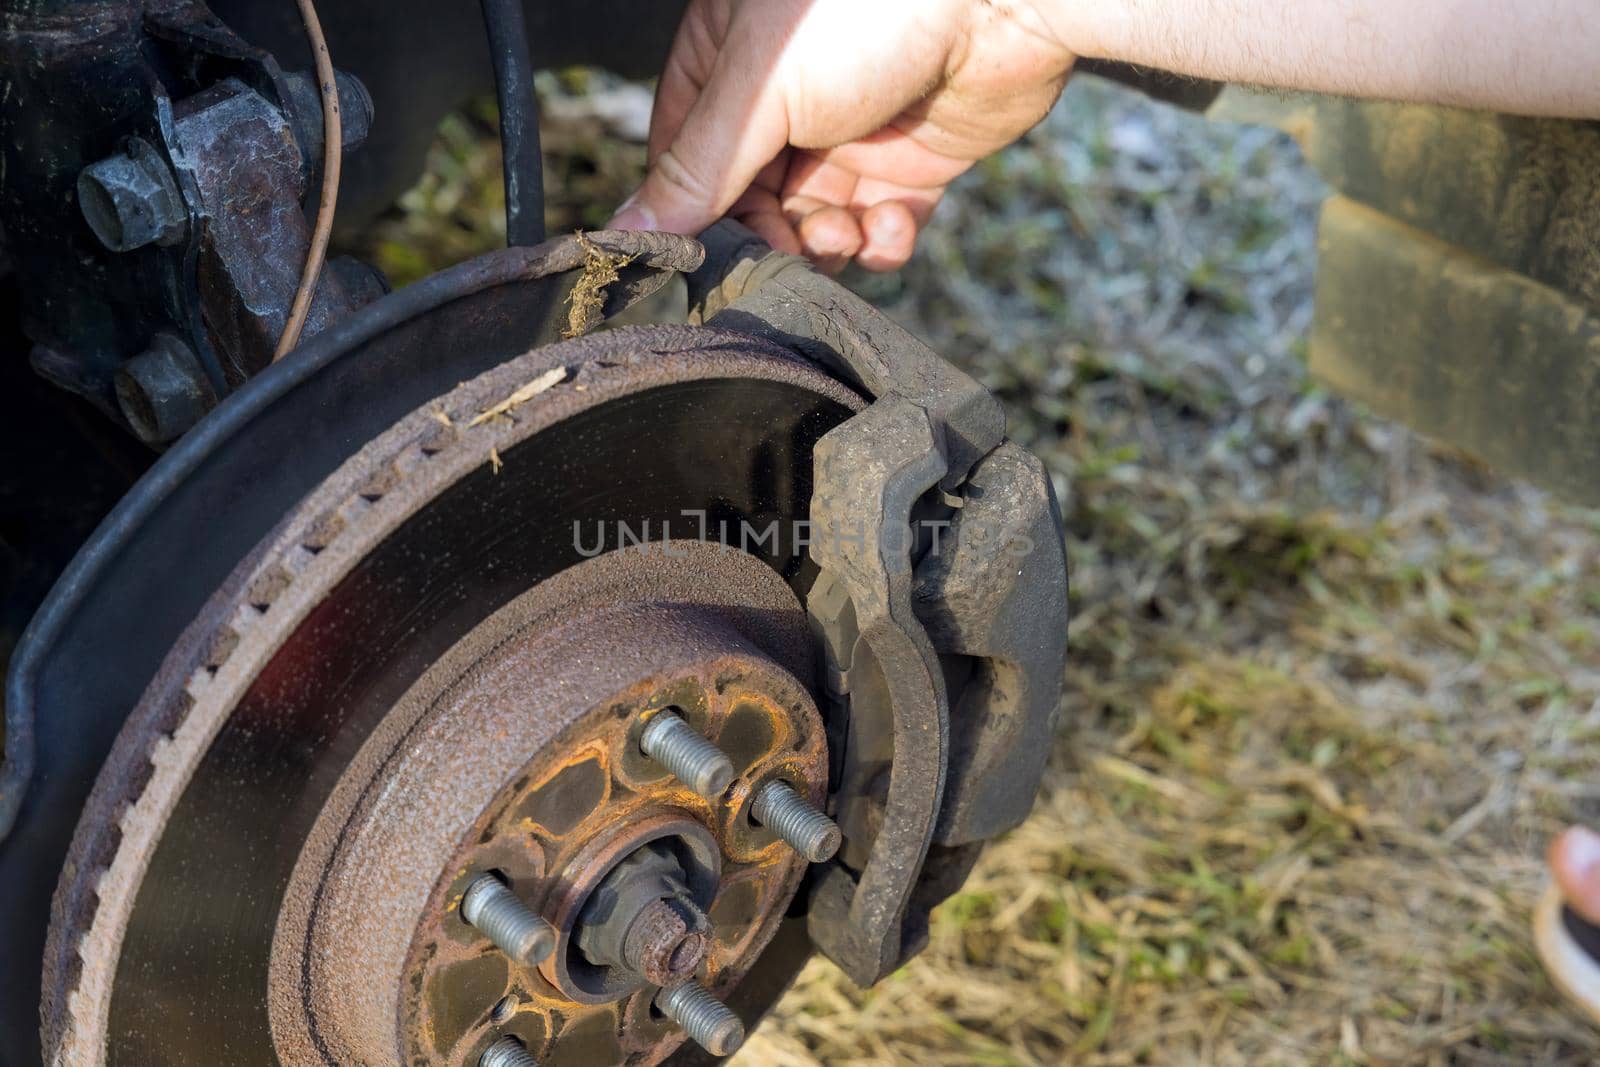 Car mechanic repair service change car disc brake pads from old brakes to new brakes